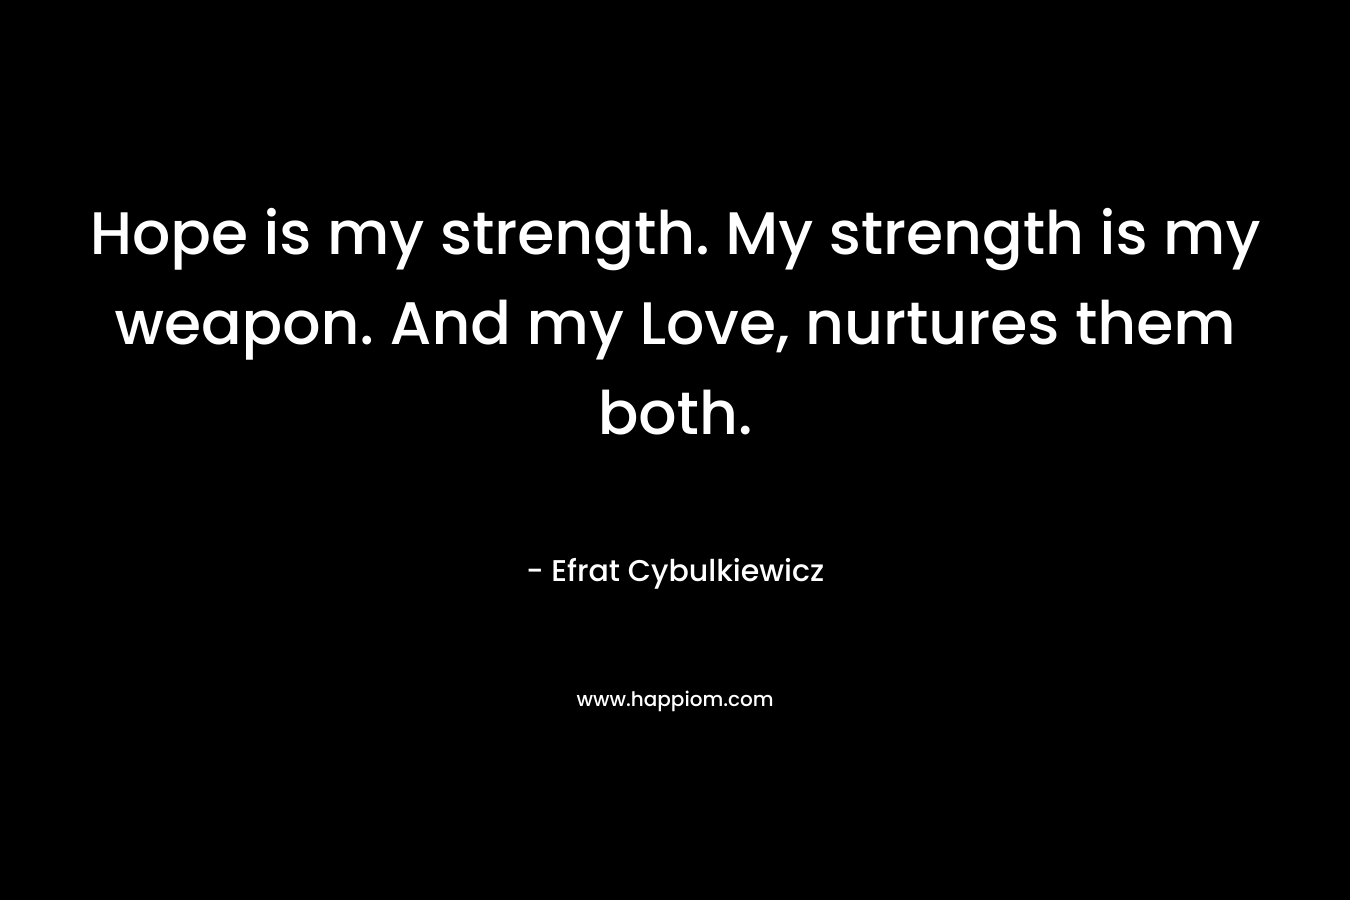 Hope is my strength. My strength is my weapon. And my Love, nurtures them both.